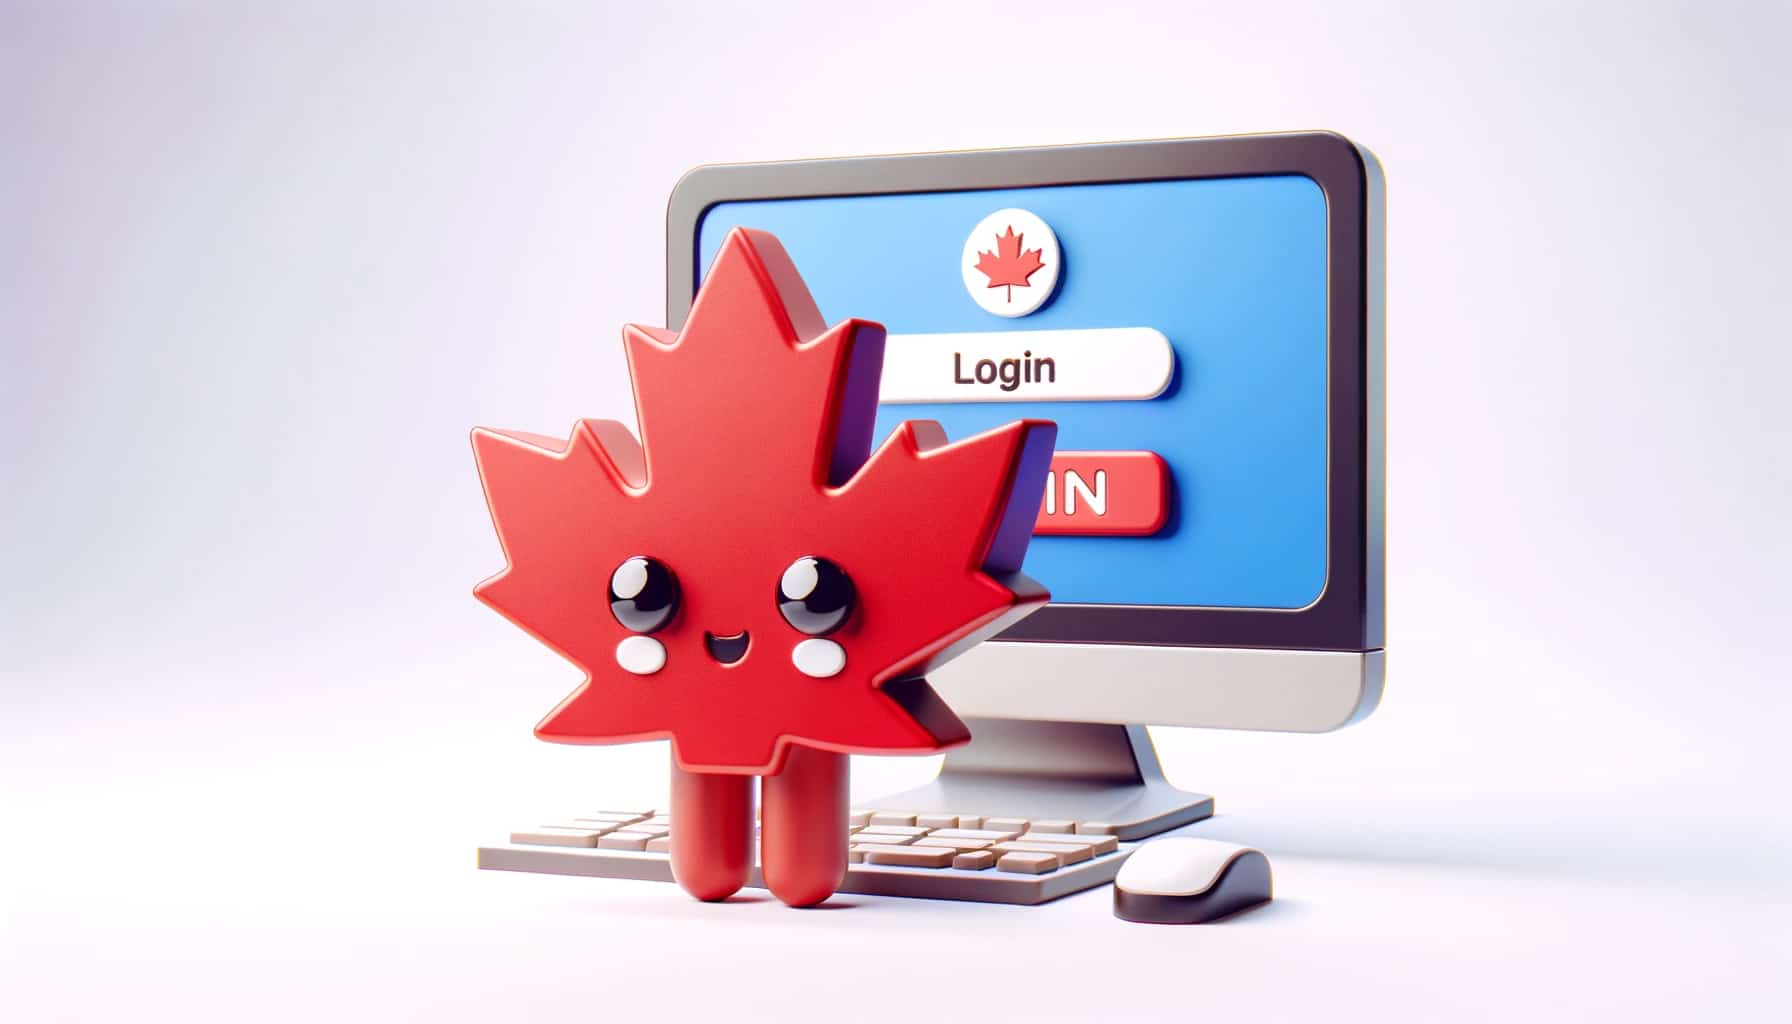 A maple figure stands near a screen with a log in form